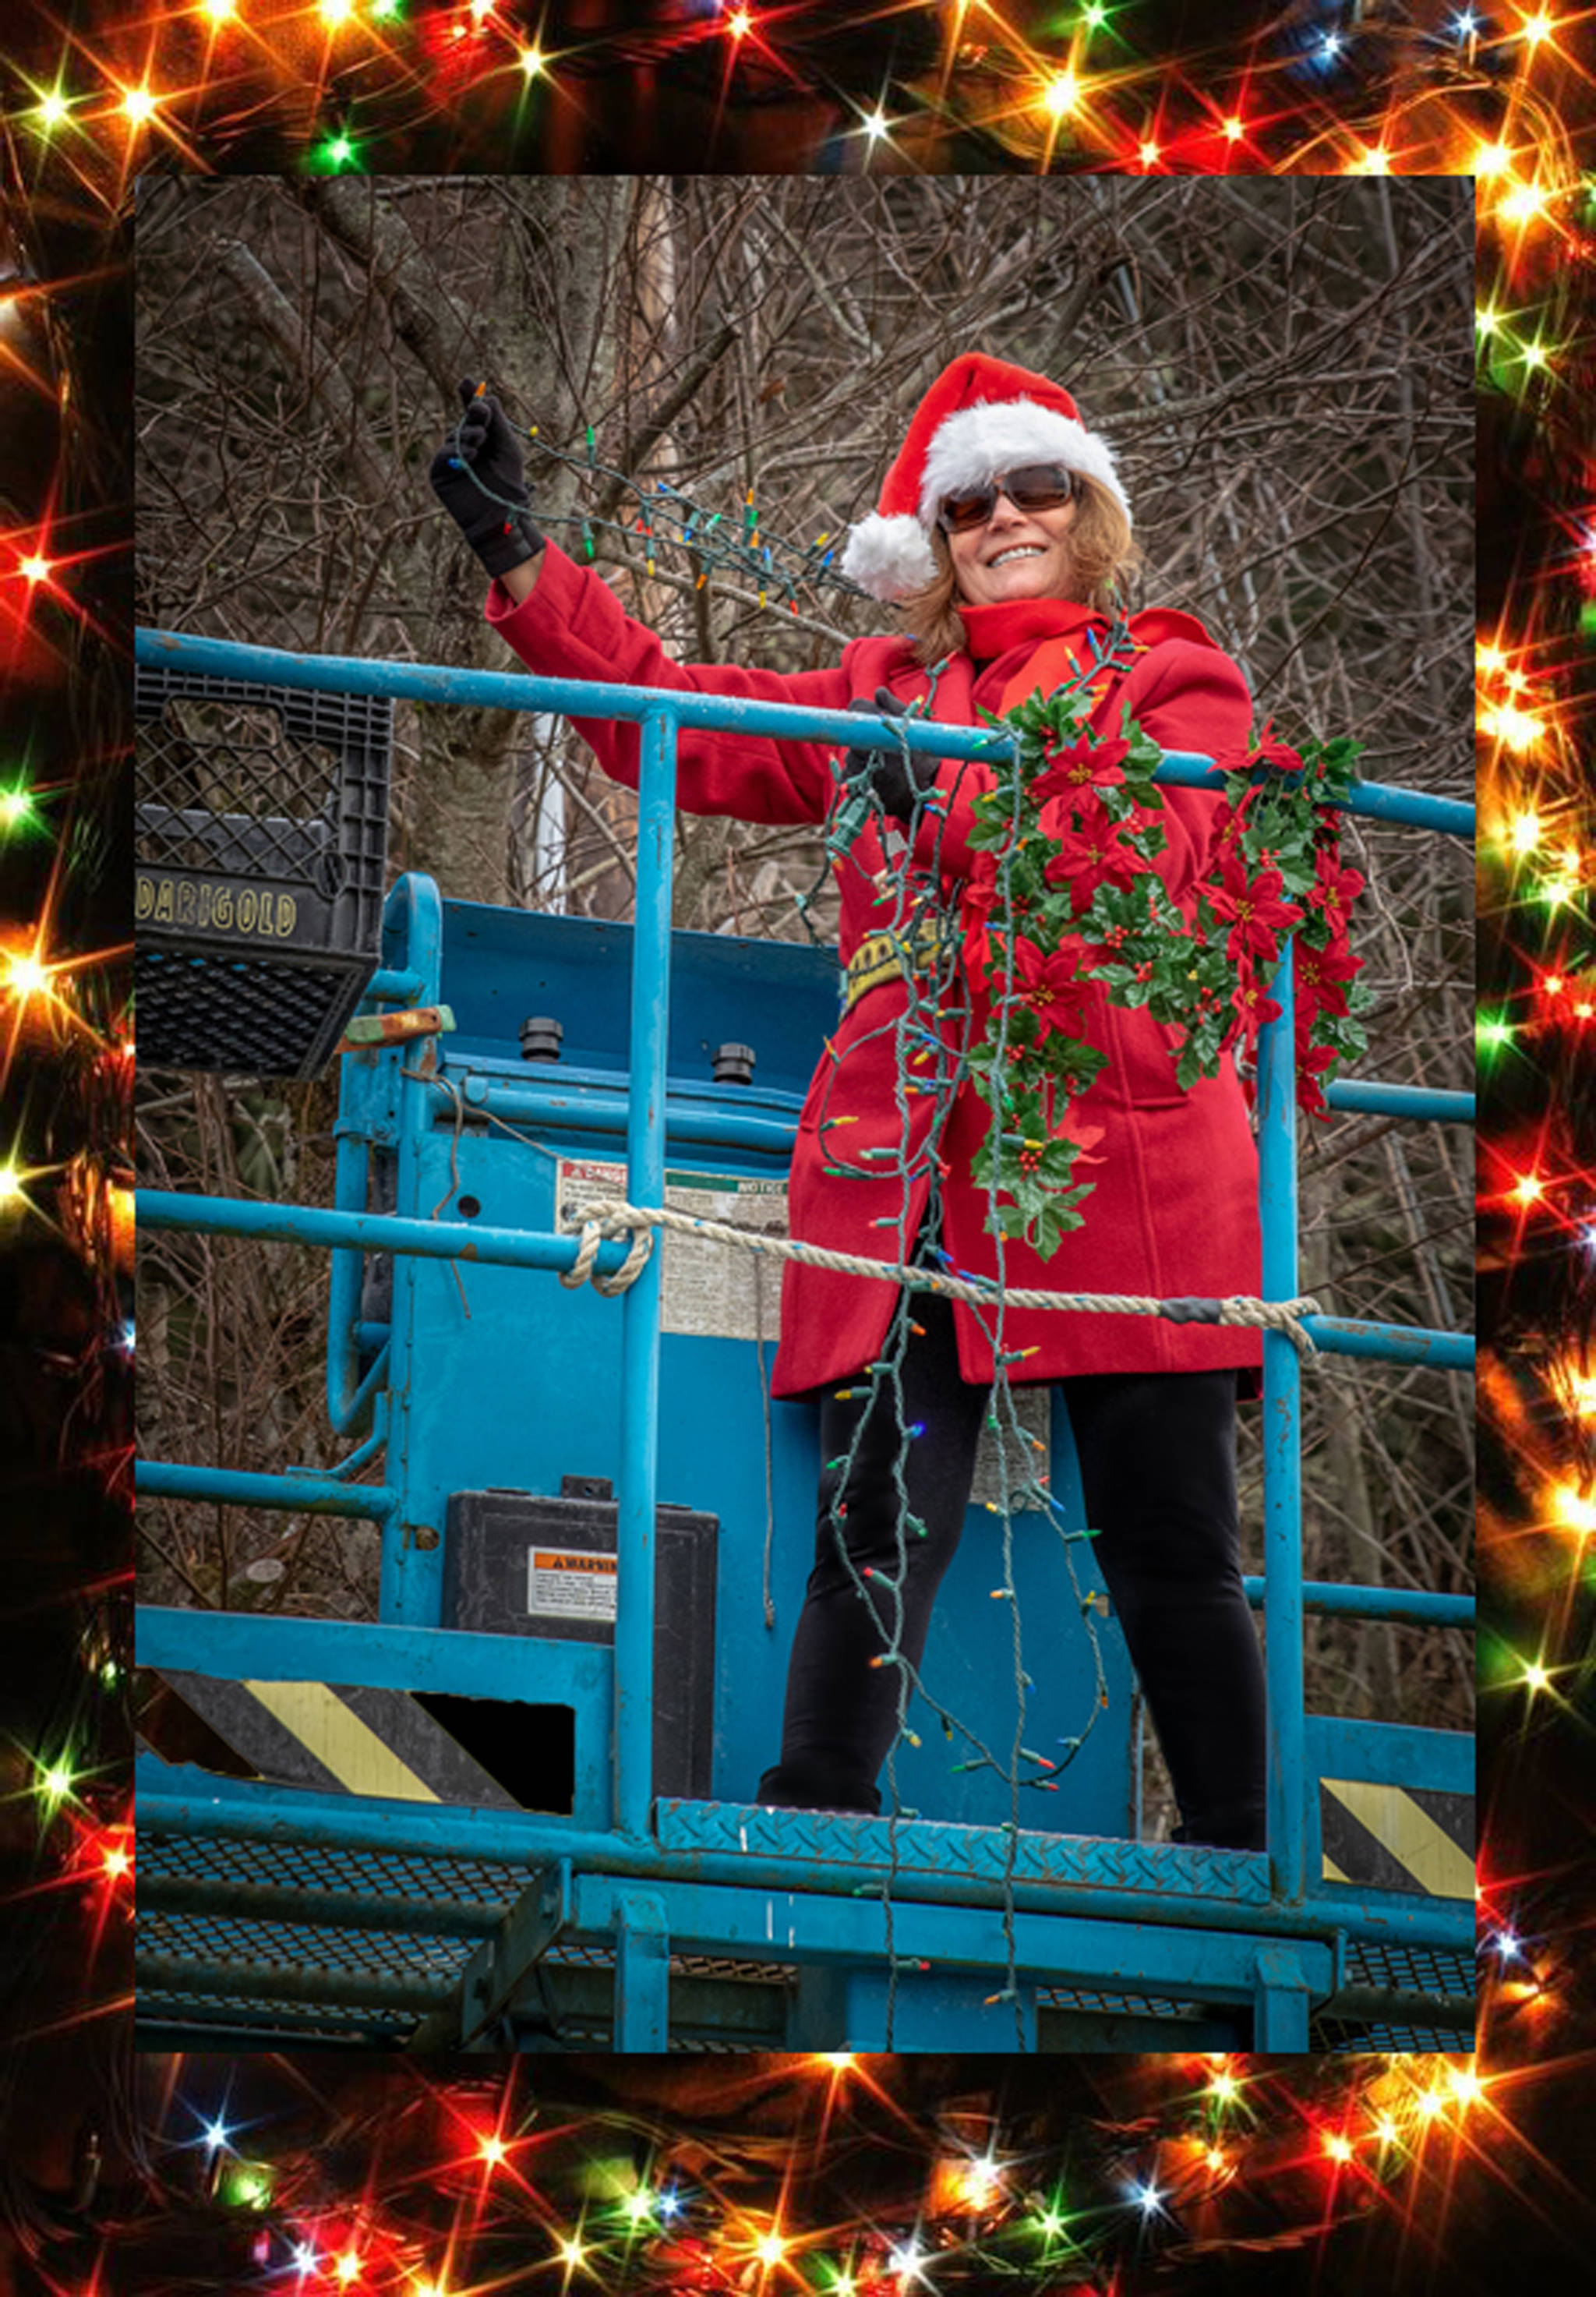 Dec. 23, 2018: Tis the season to enjoy the holidays in style. As part of an annual decorating tradition, Santa’s helper Mary Siroky recently assisted in hanging holiday lights at the Gitkov dock in Auke Bay. Her stylish outfit includes a requisite Santa’s hat, red jacket, red scarf and black pants and boots. And although her clothes were not tarnished with ashes or soot, she was wearing her requisite OSHA safety belt as she was hoisted into the air.